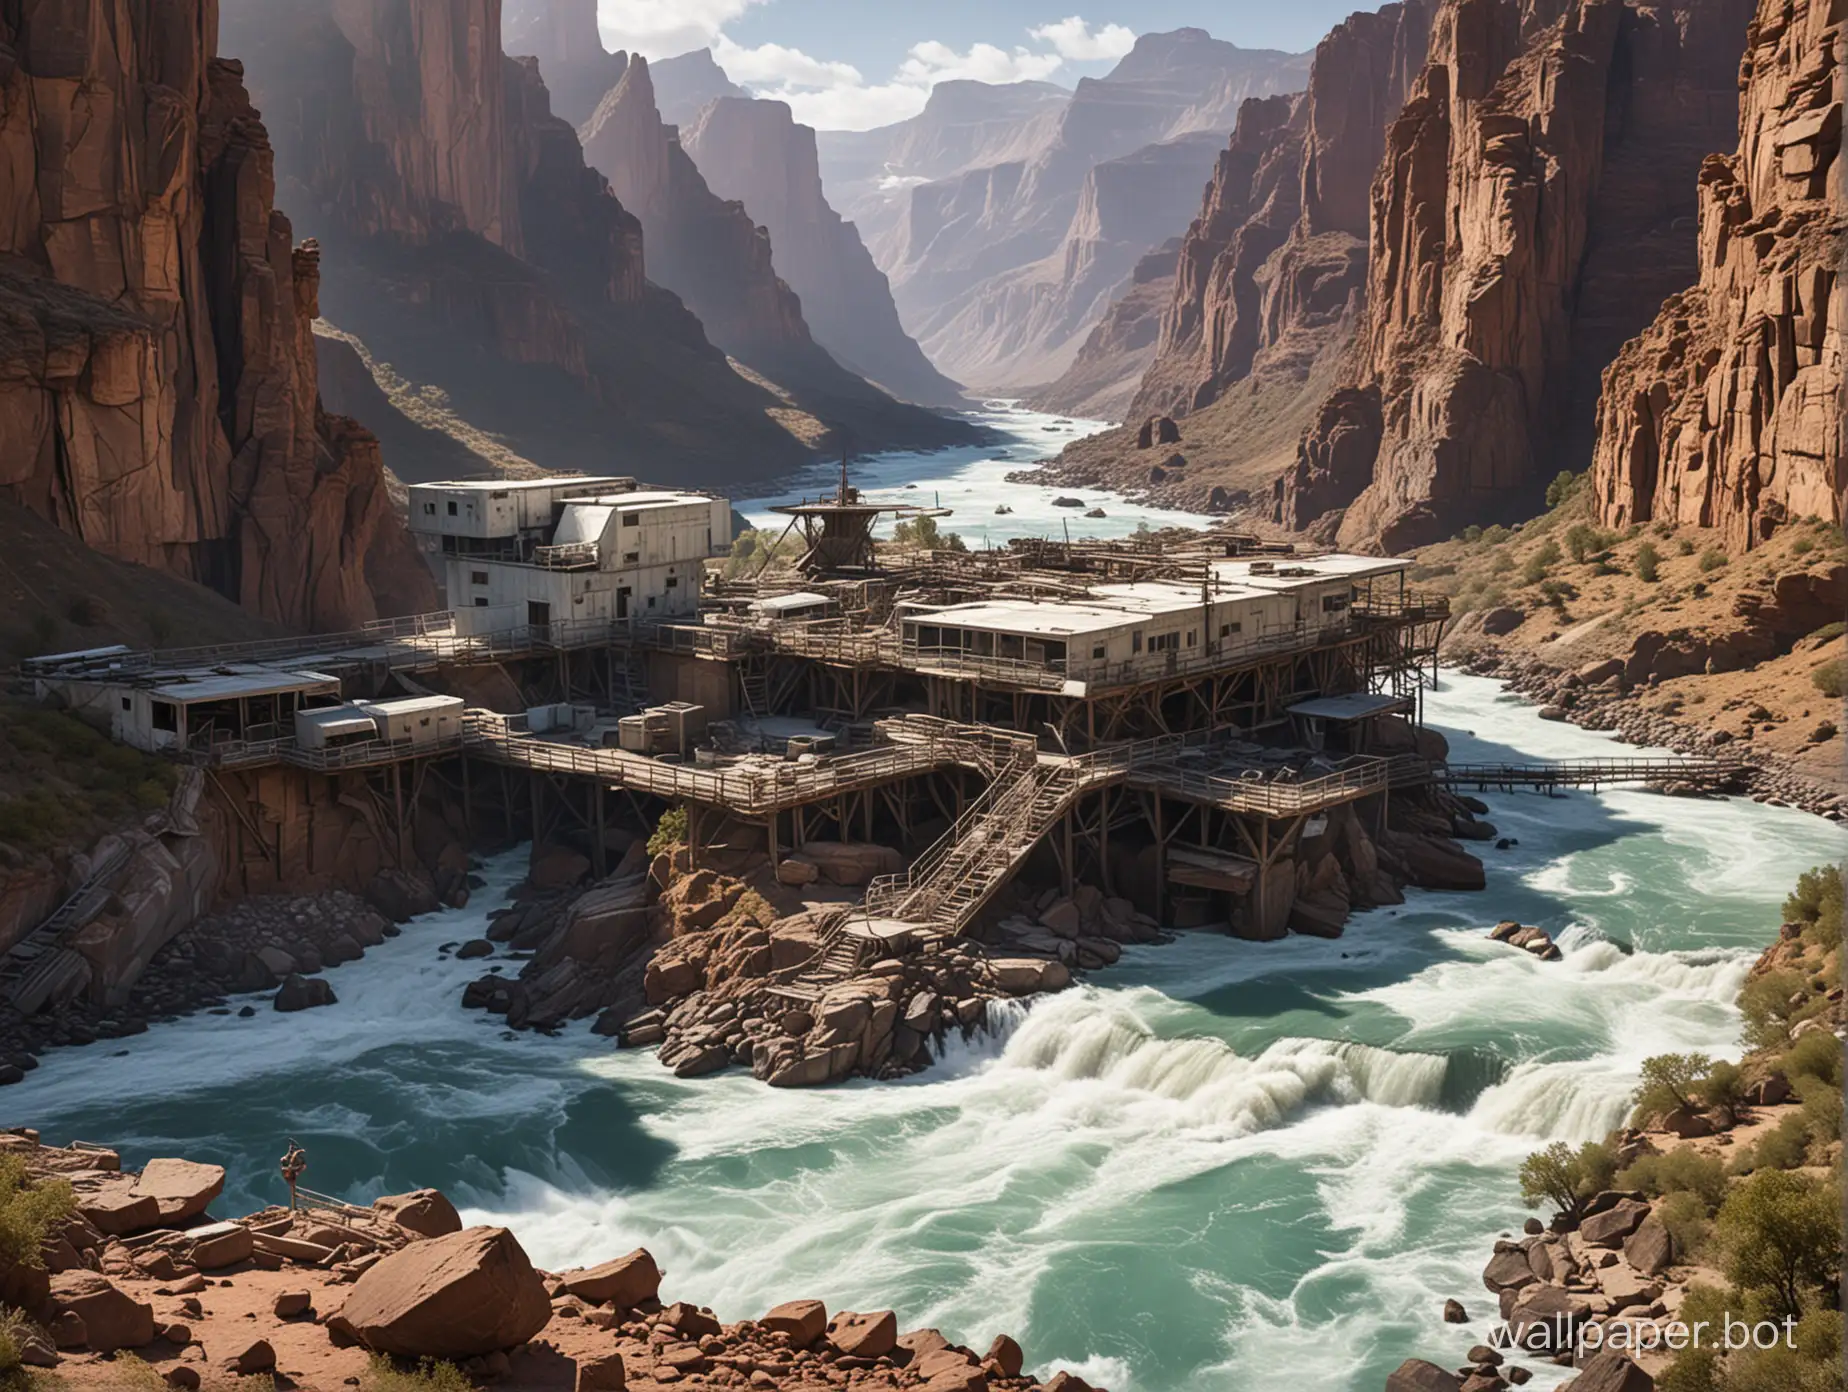 A dilapidated research station overlooking a canyon with rushing rapids